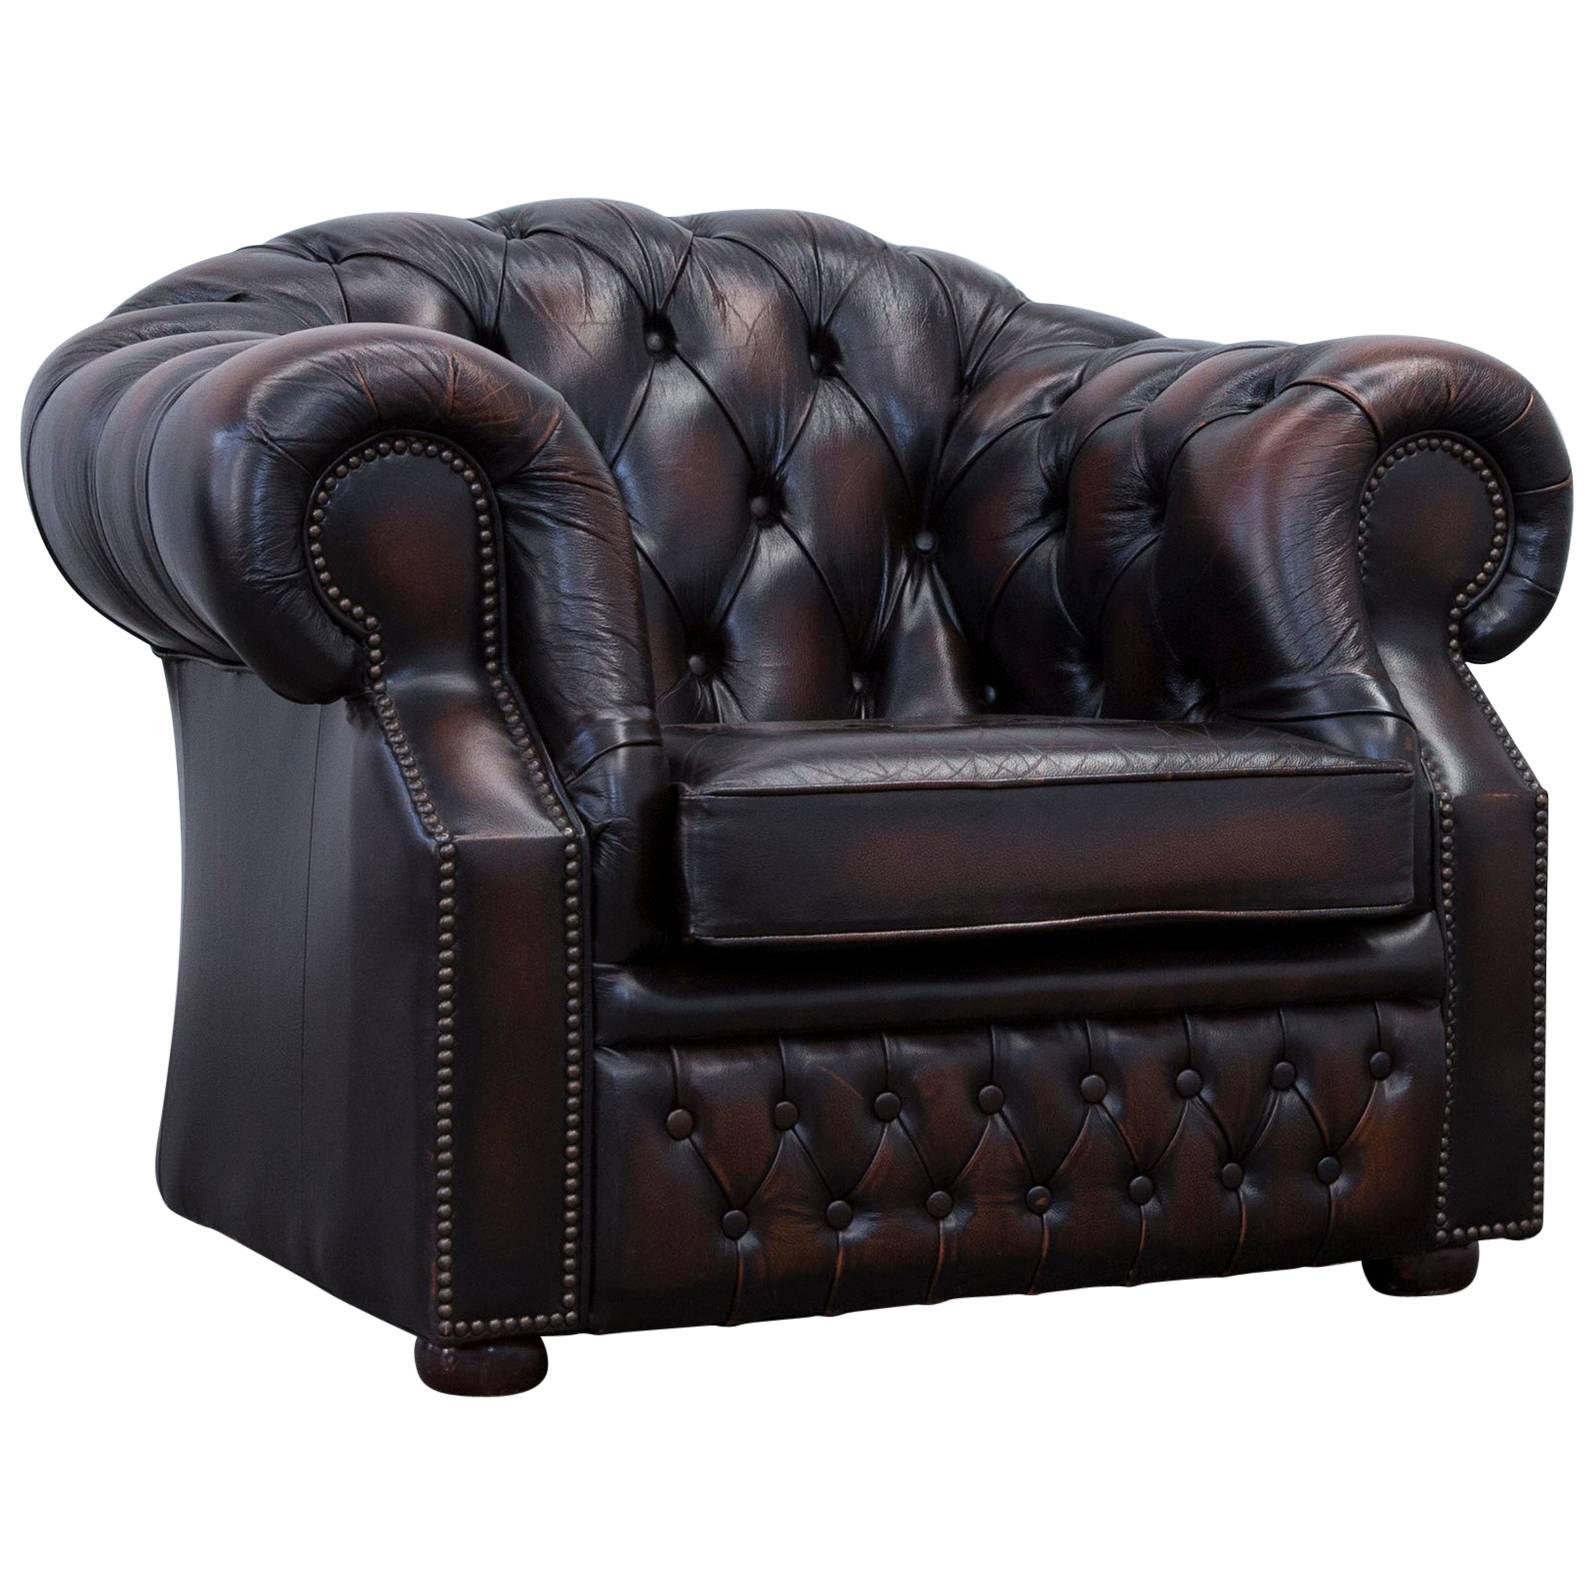 Chesterfield Armchair Leather Brown One Seat Couch Vintage Retro